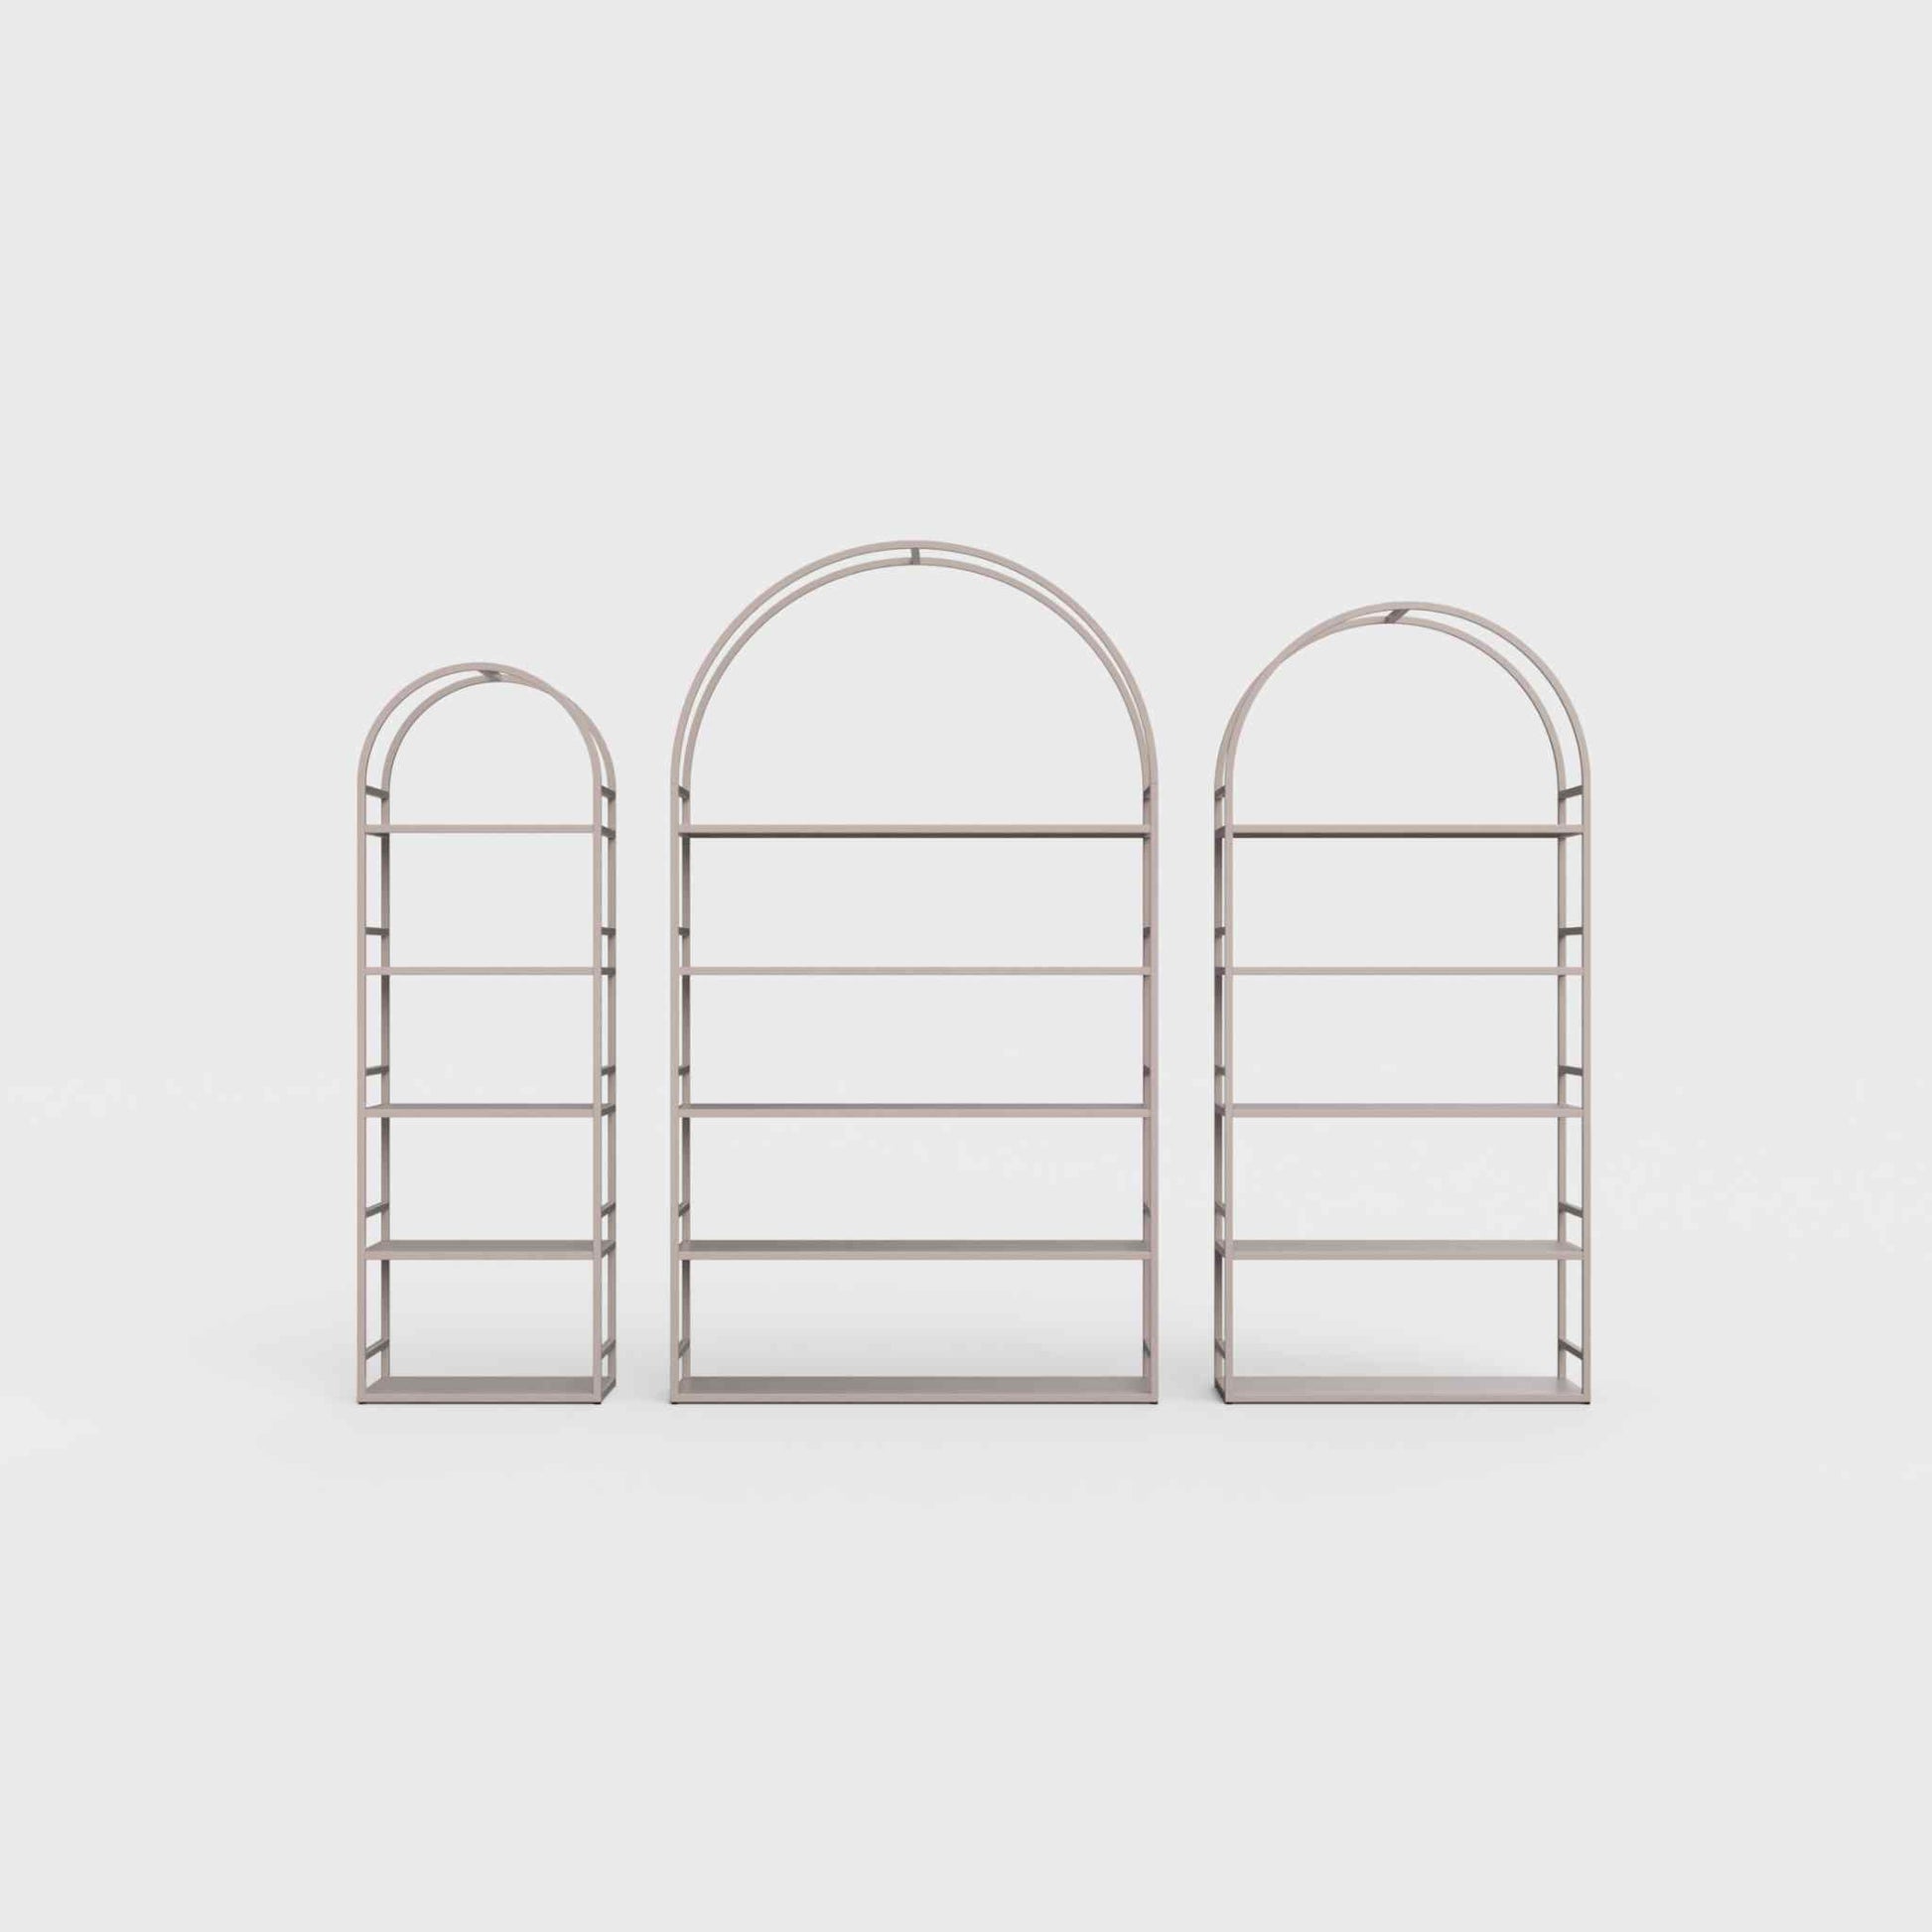 Arched bookcase Arkada, available in Switzerland through ÉTAUDORÉ, made from highest quality powdered coated steel in cold beige